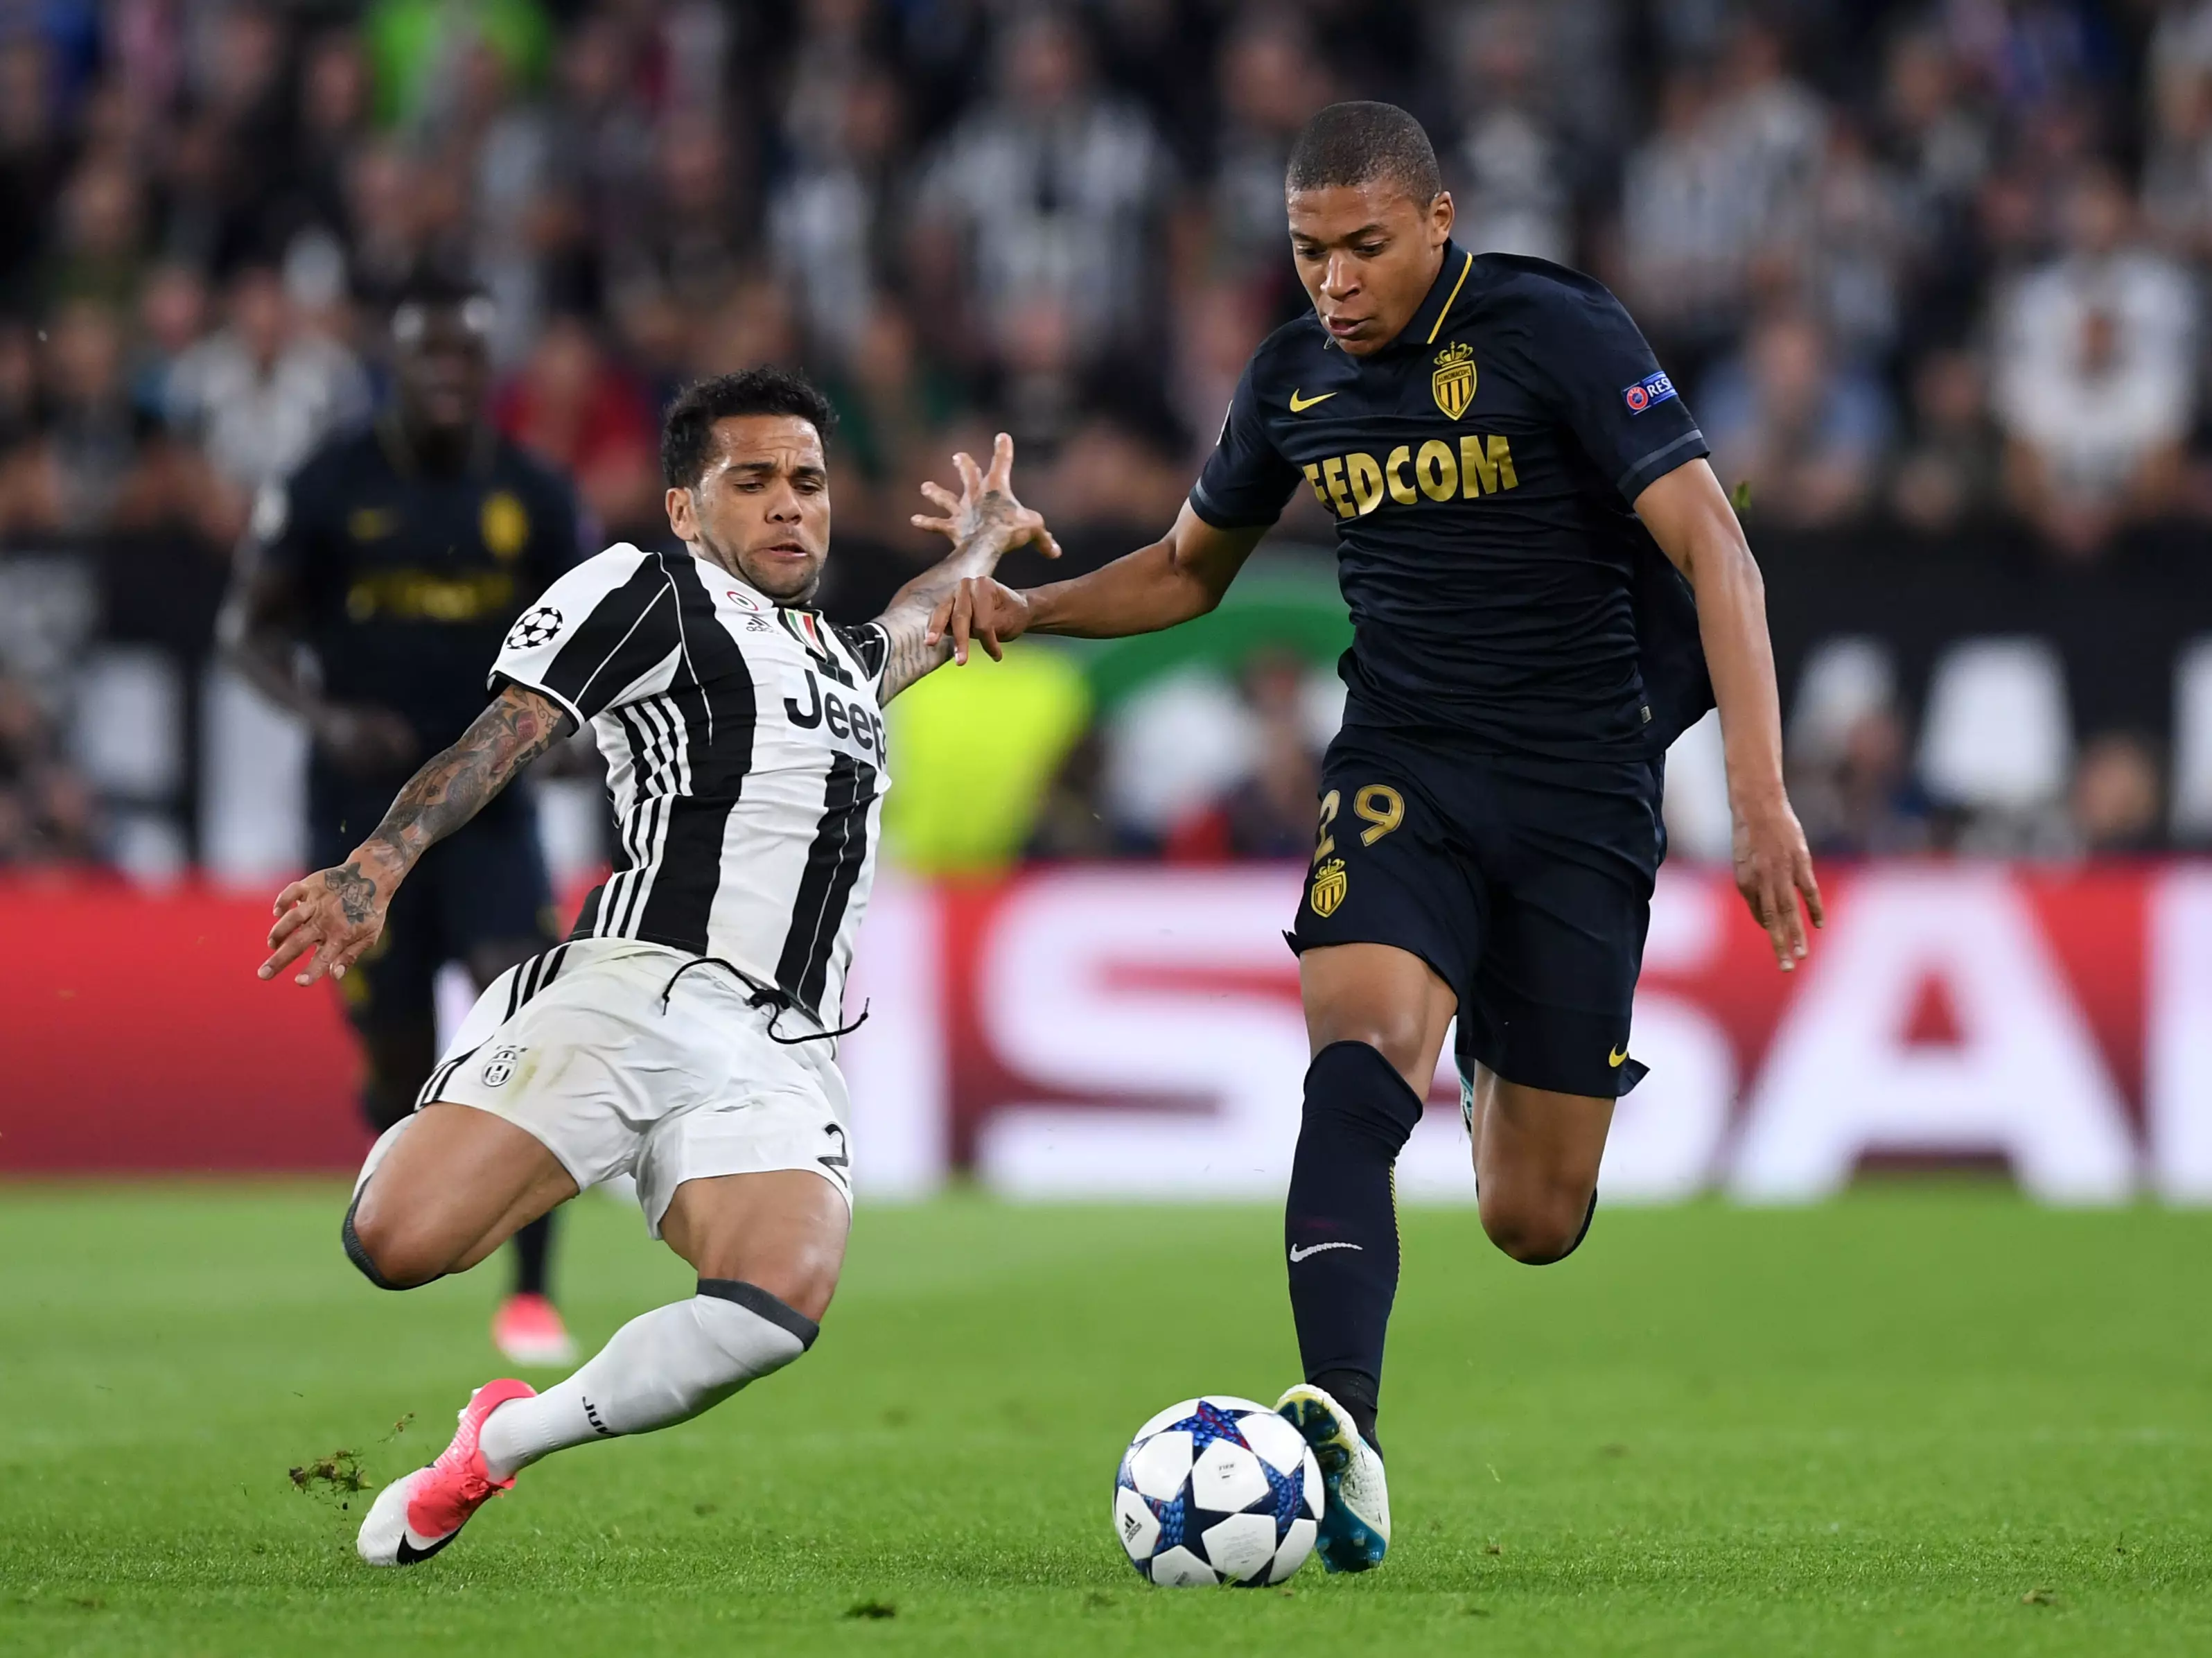 Juventus Reveal €260 Million Plan To Sign Kylian Mbappe From PSG